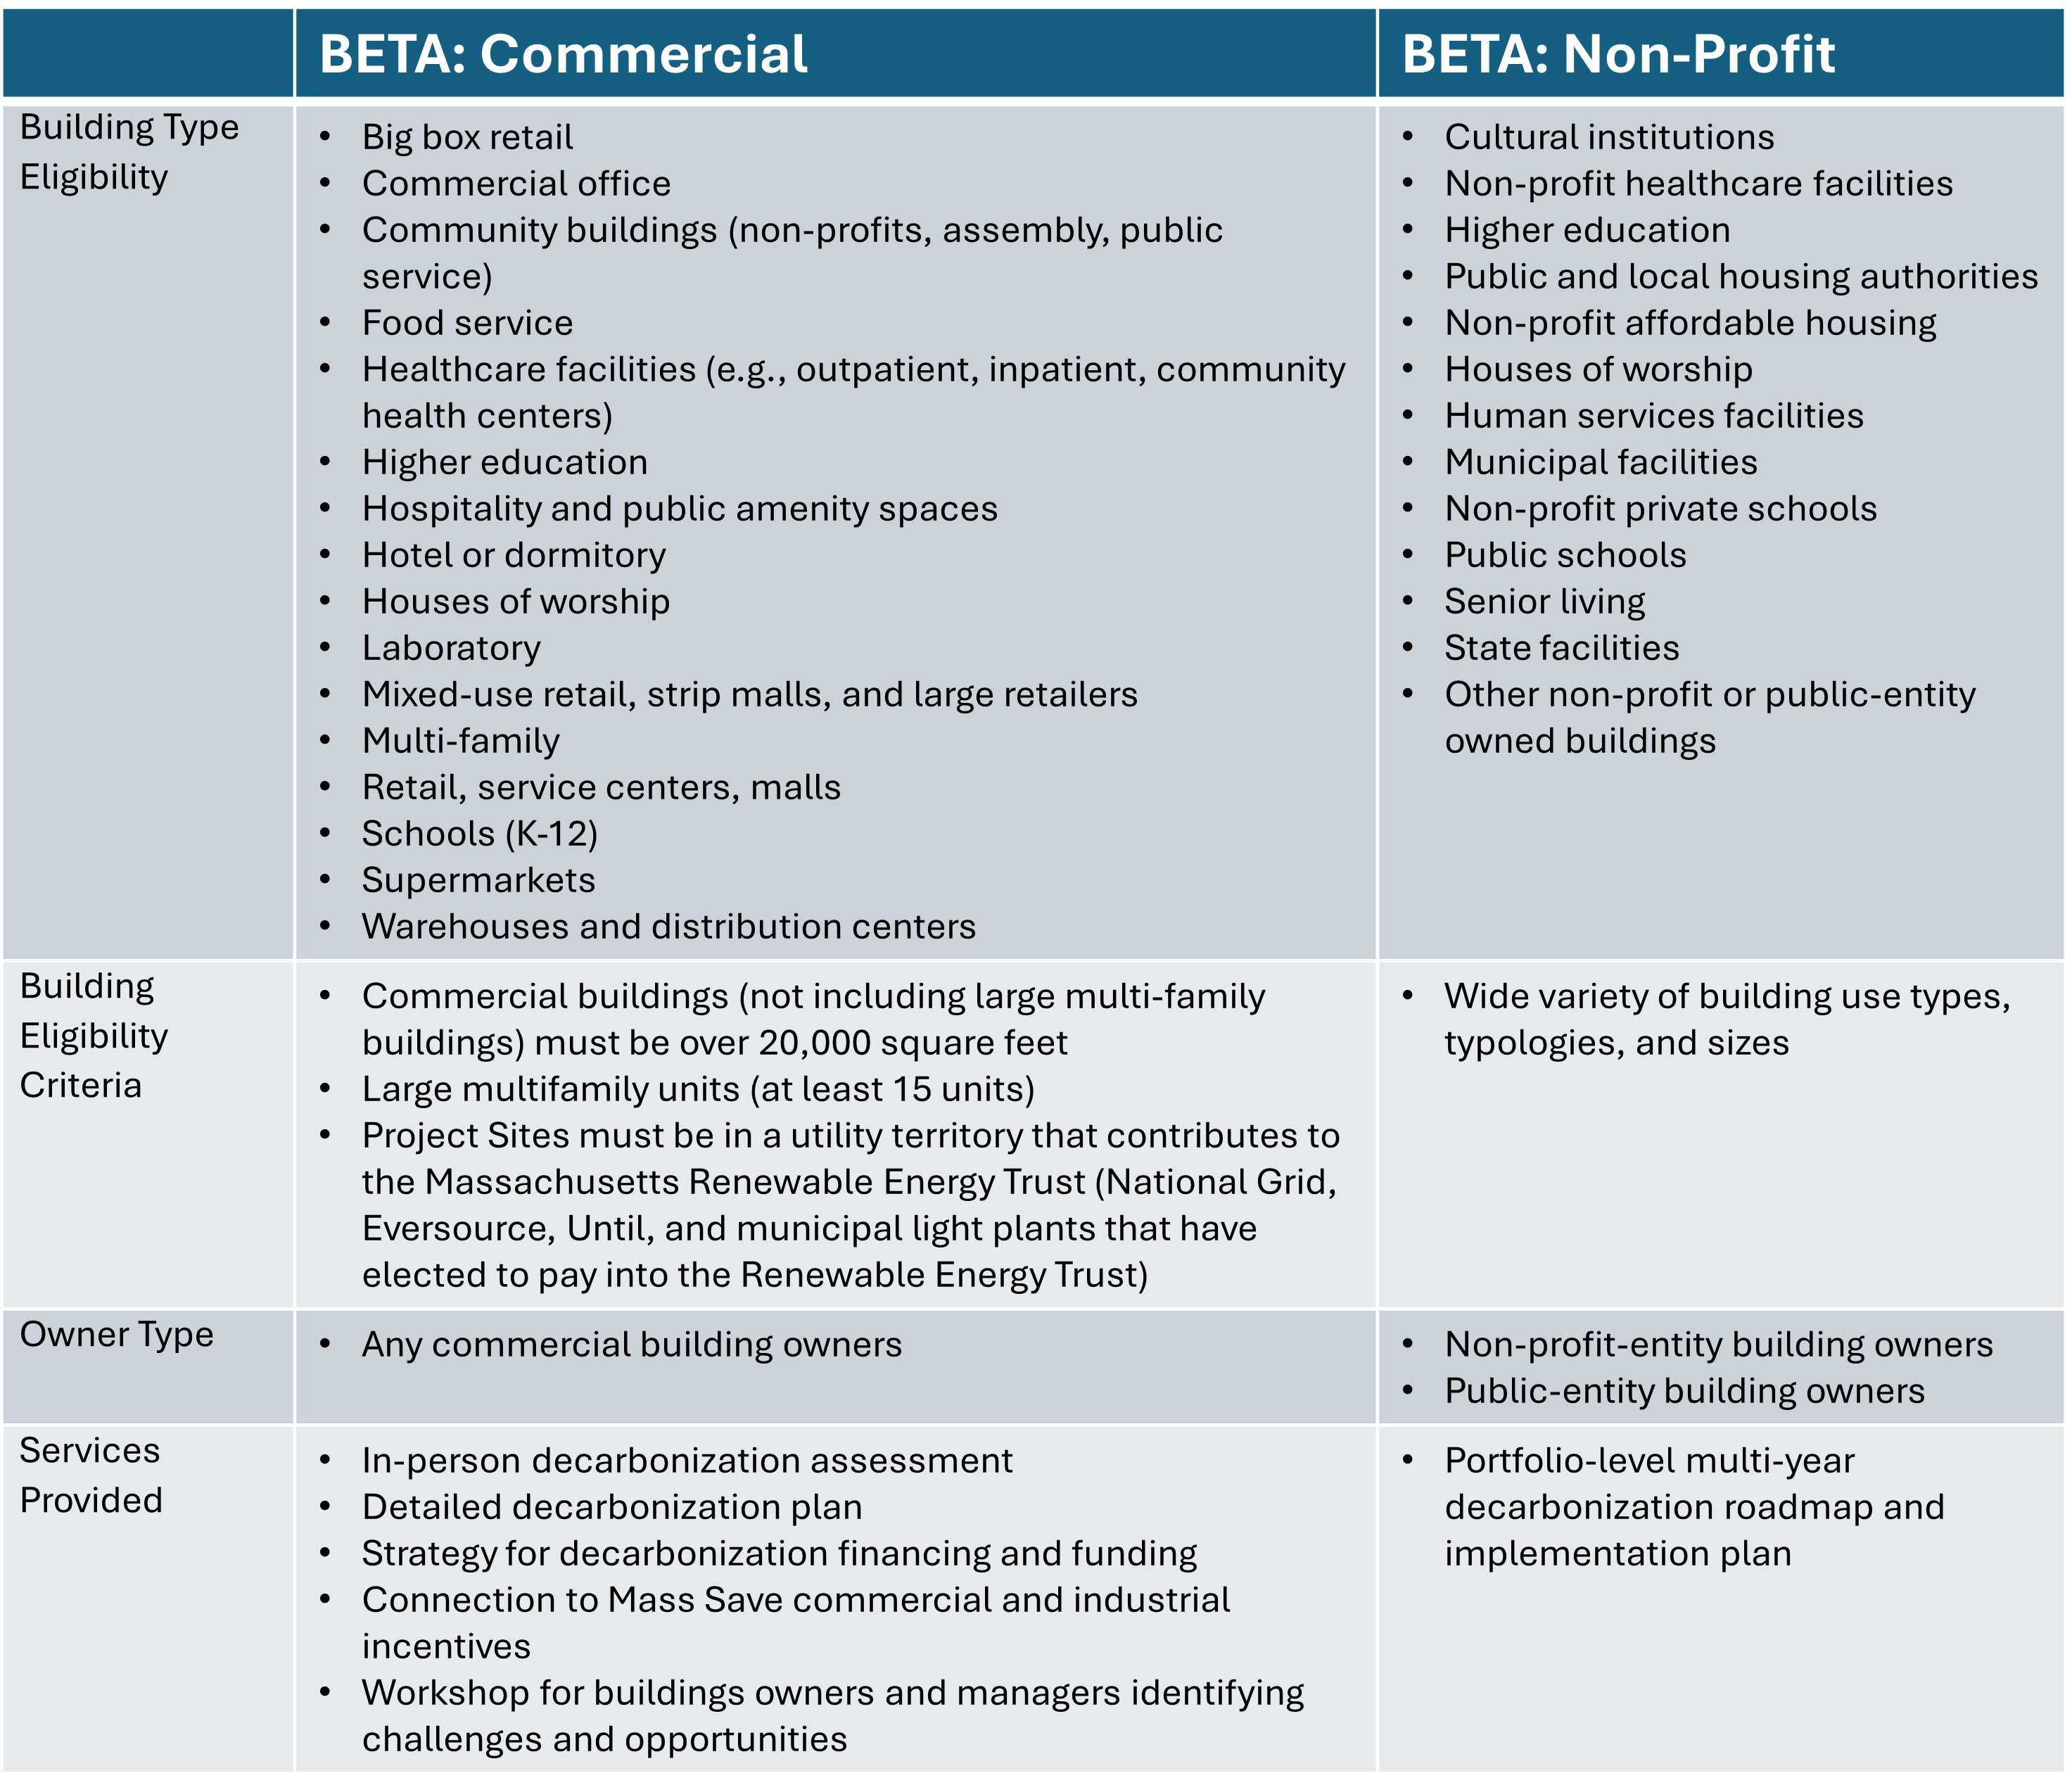 Table comparing BETA Commercial and BETA Non-Profit programs